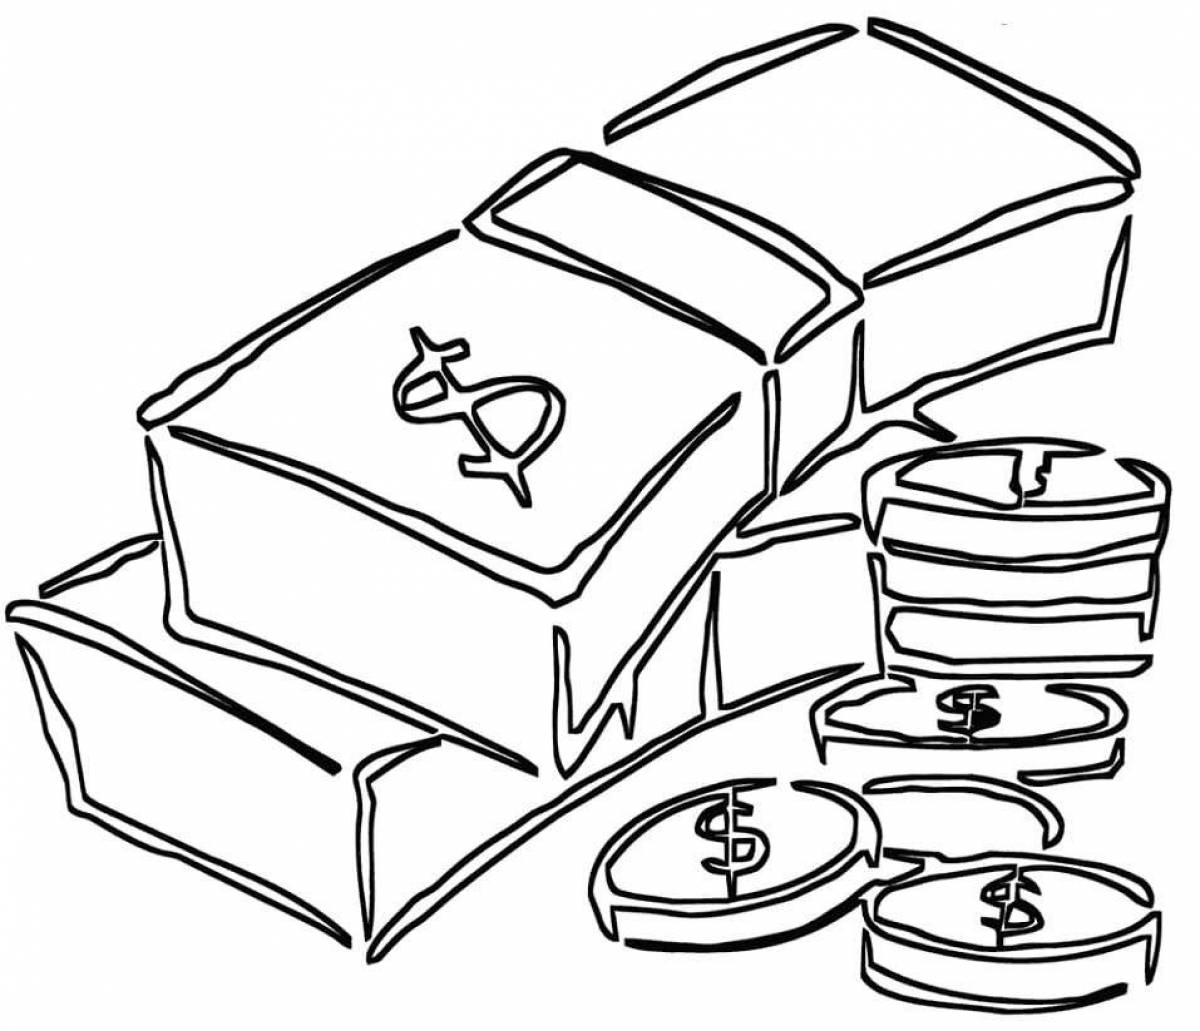 Colorful money coloring page for little students